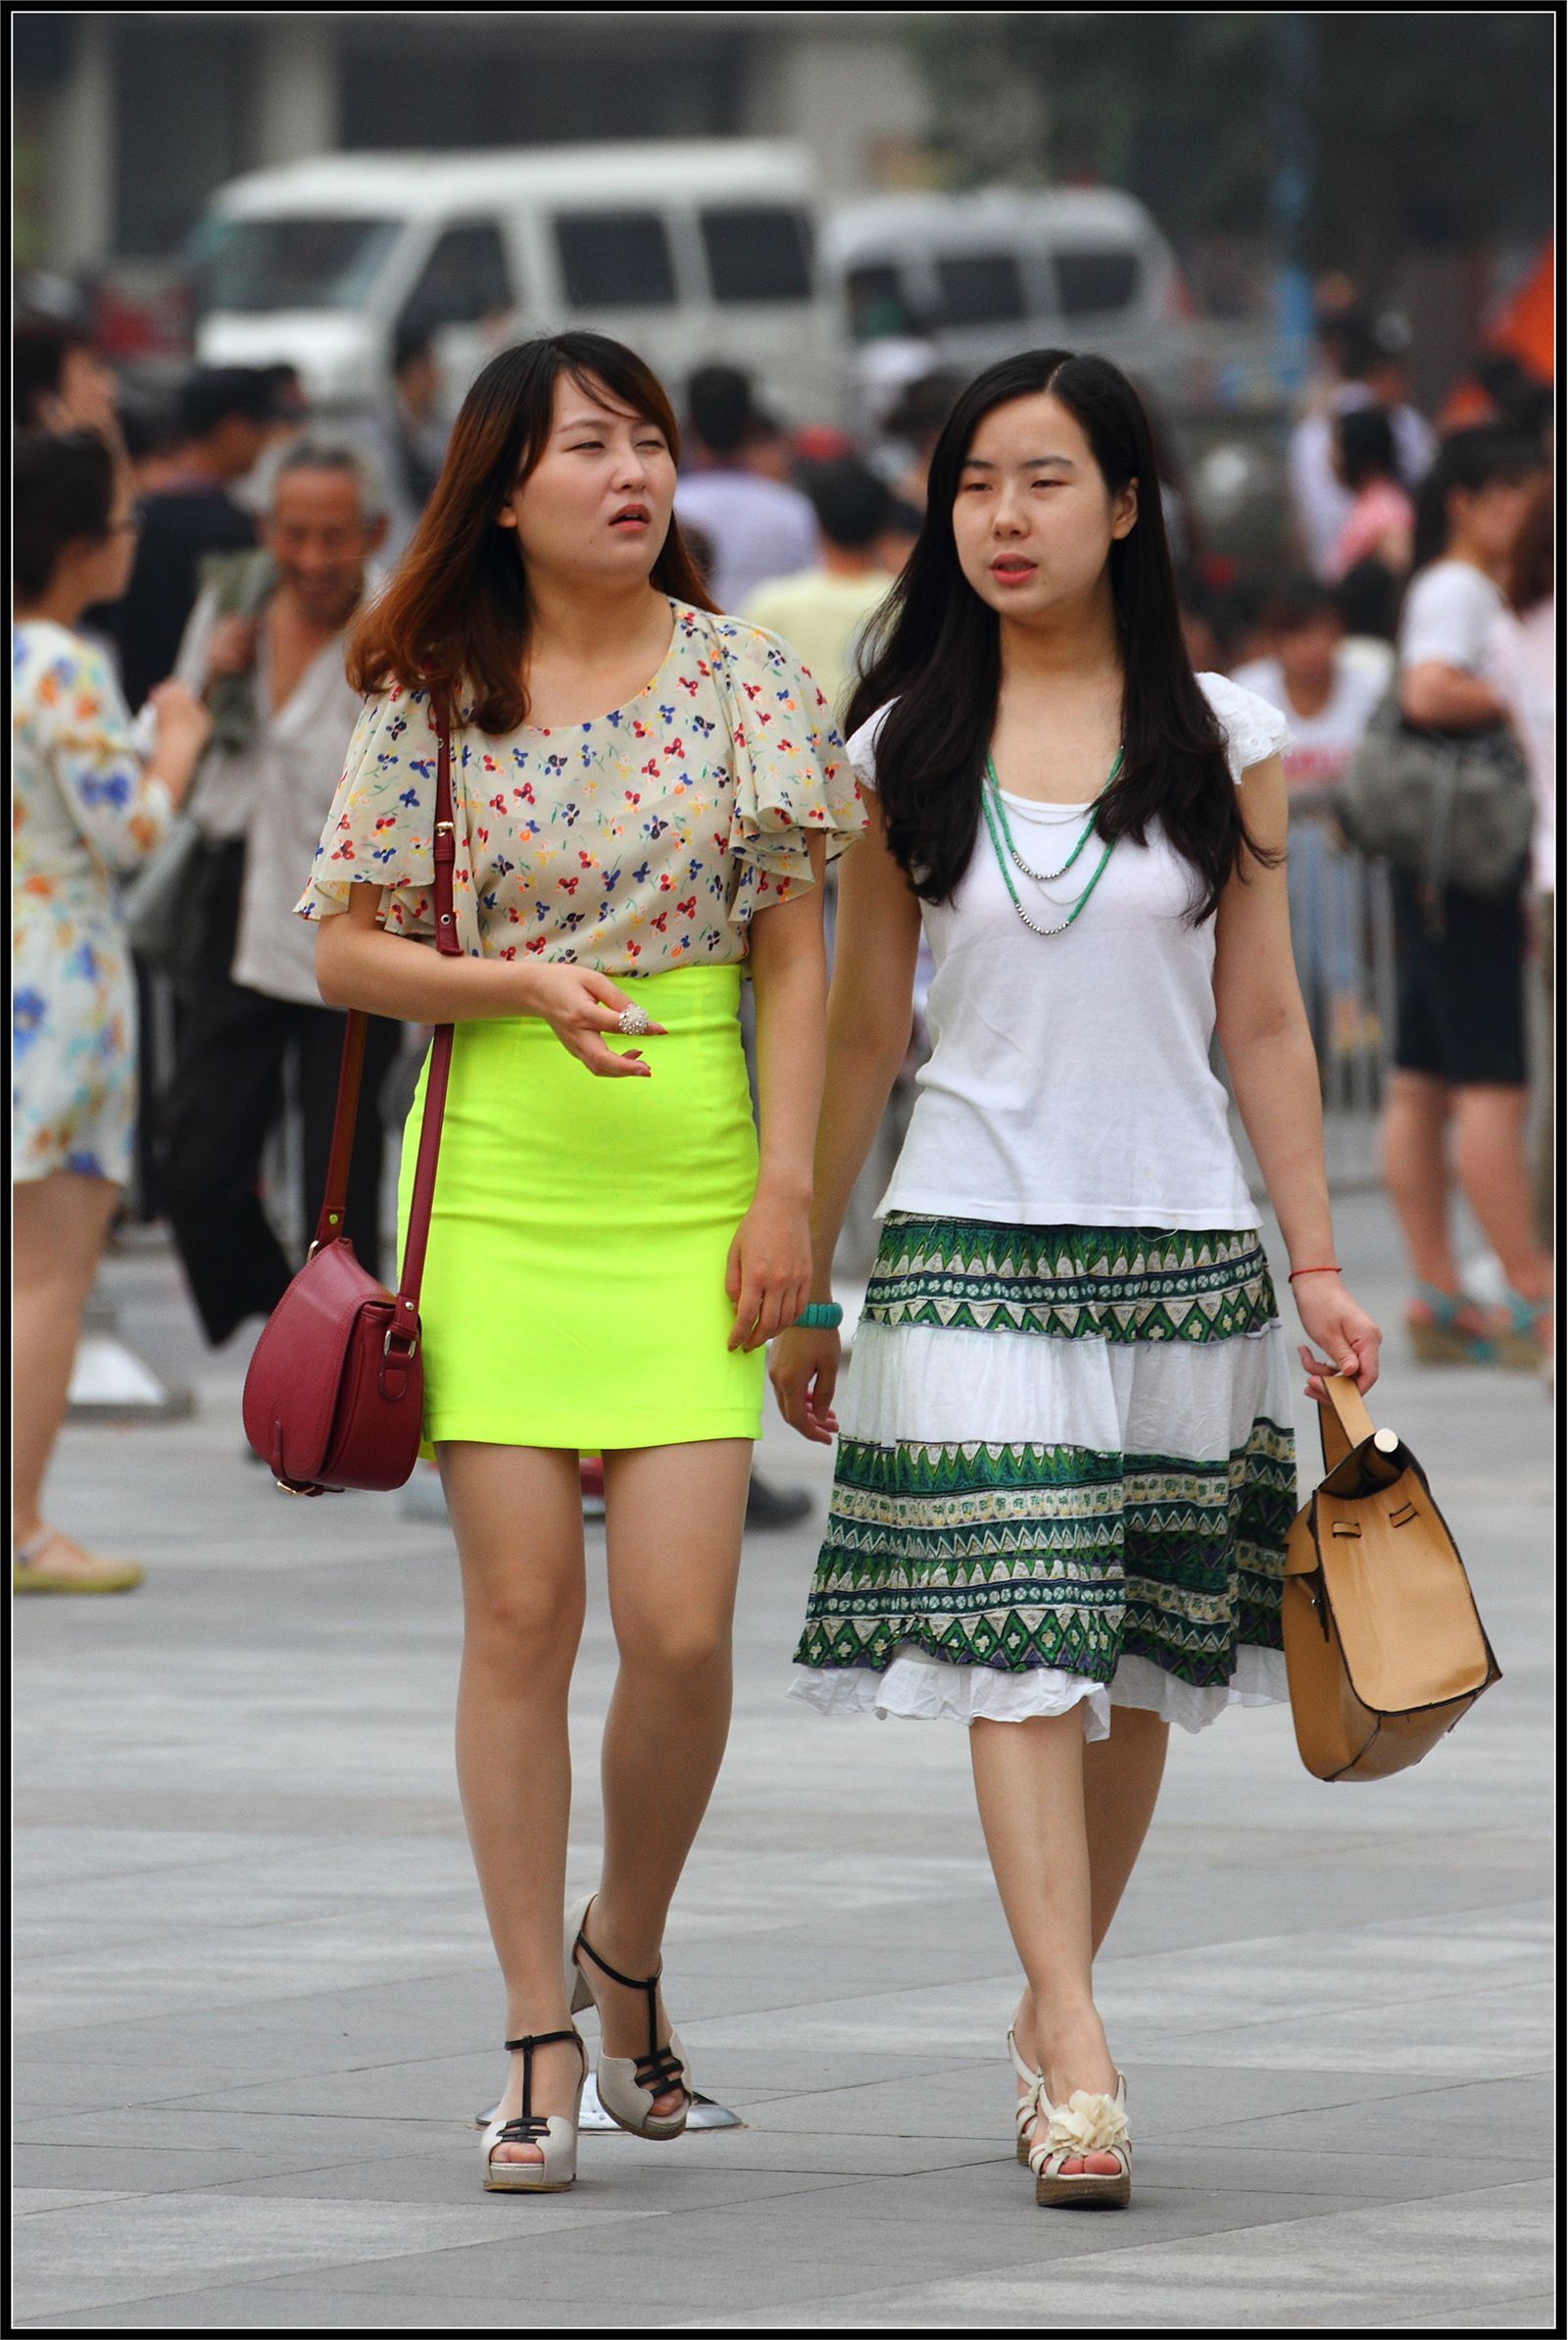 [outdoor Street Photo] on September 23, 2013, the thigh high heels under the yellow skirt are very attractive